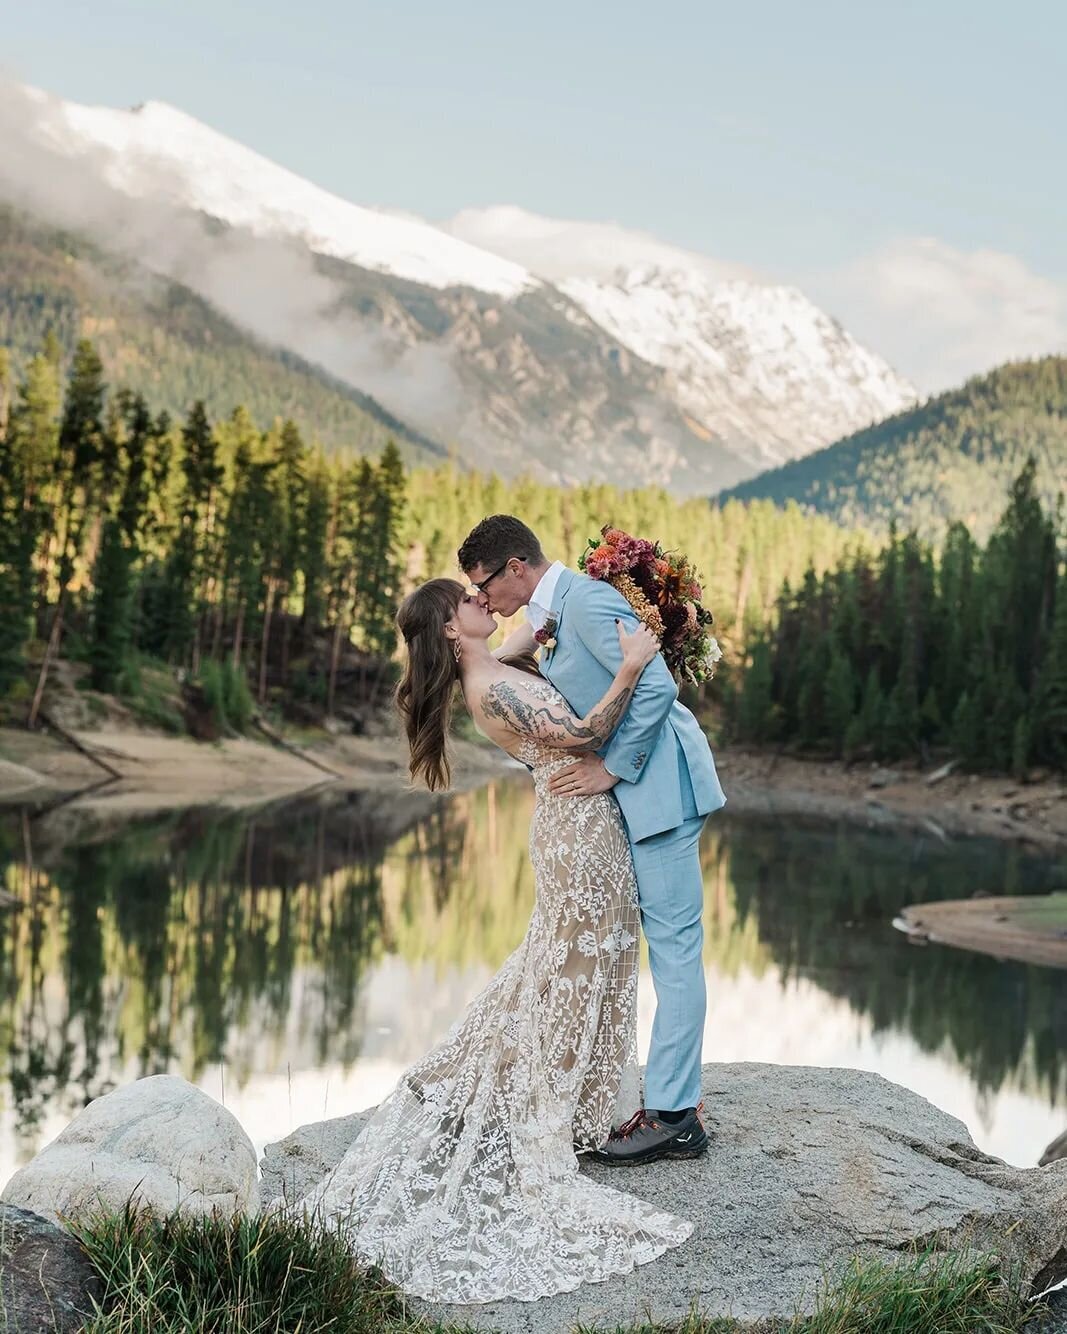 Say your vows in an intimate and meaningful wedding ceremony amidst the breathtaking beauty of the Rocky Mountains, and let Sam Immer Photography capture your love and connection.